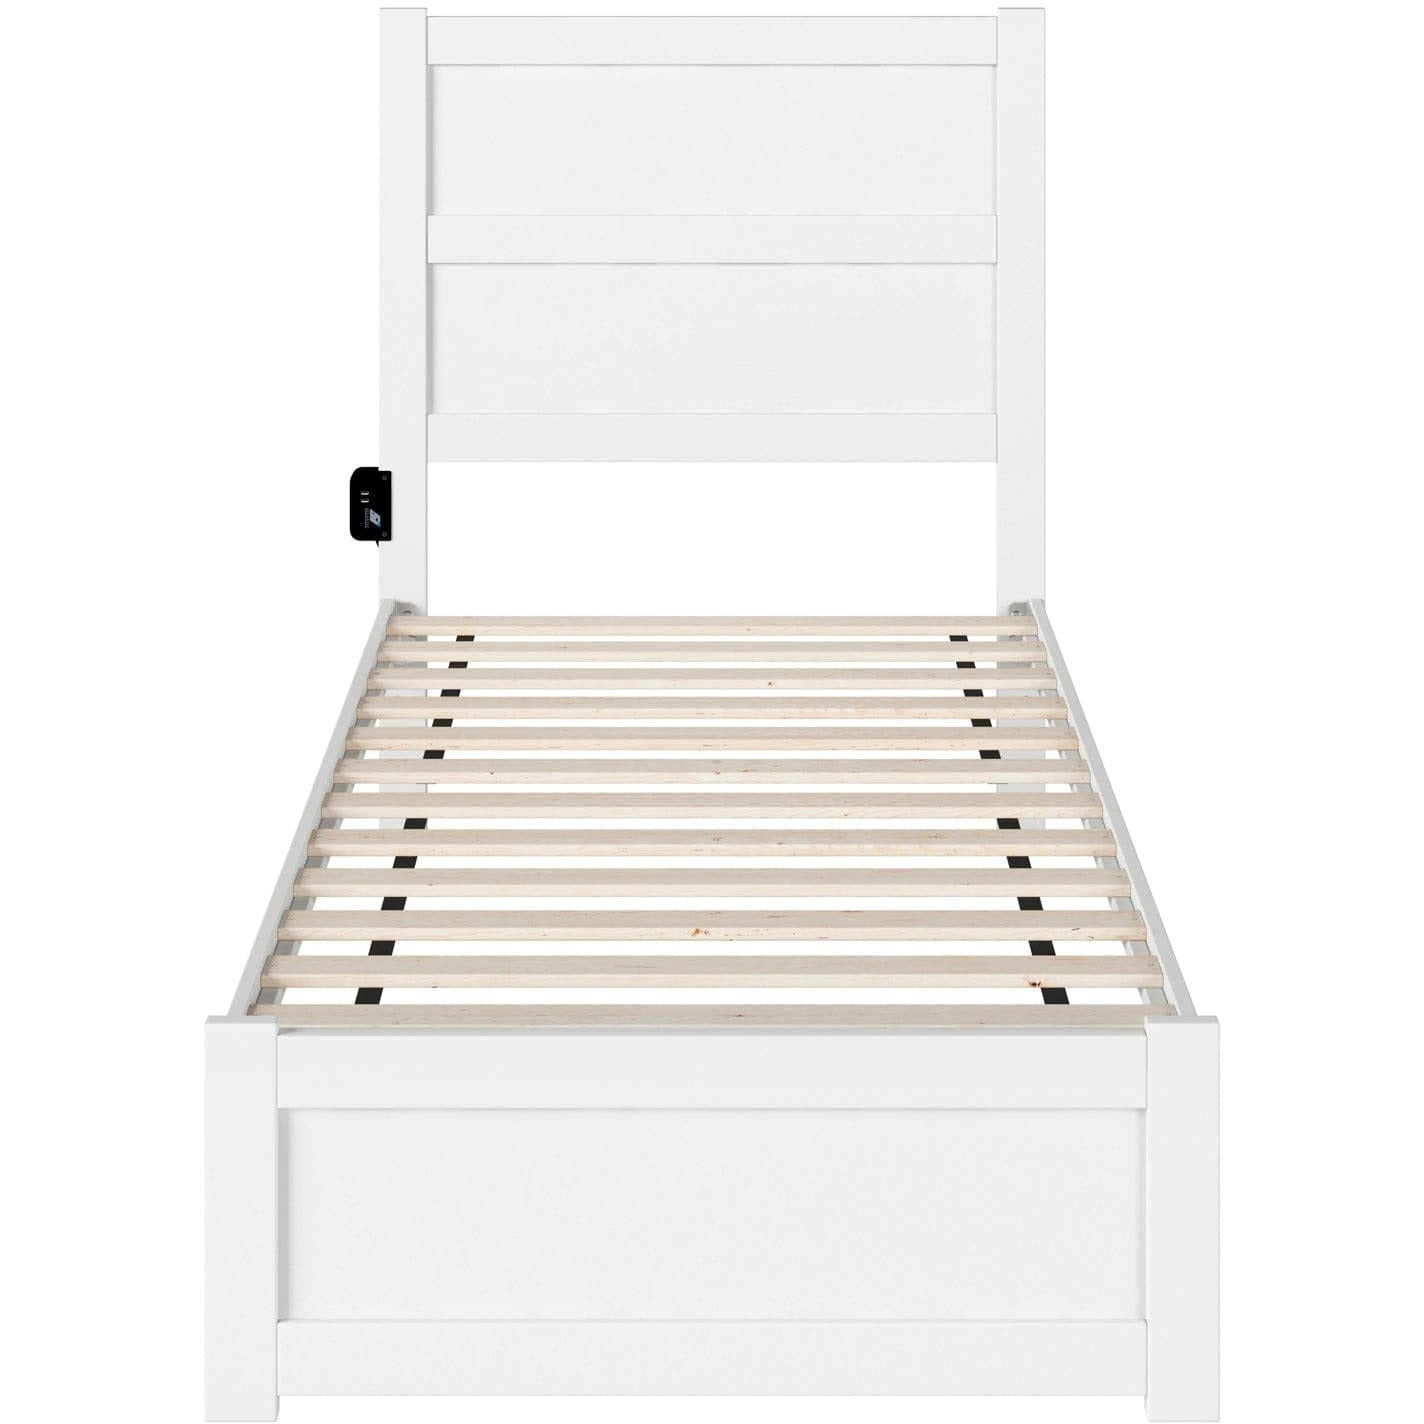 AFI Furnishings NoHo Twin Bed with Footboard in White AG9160022